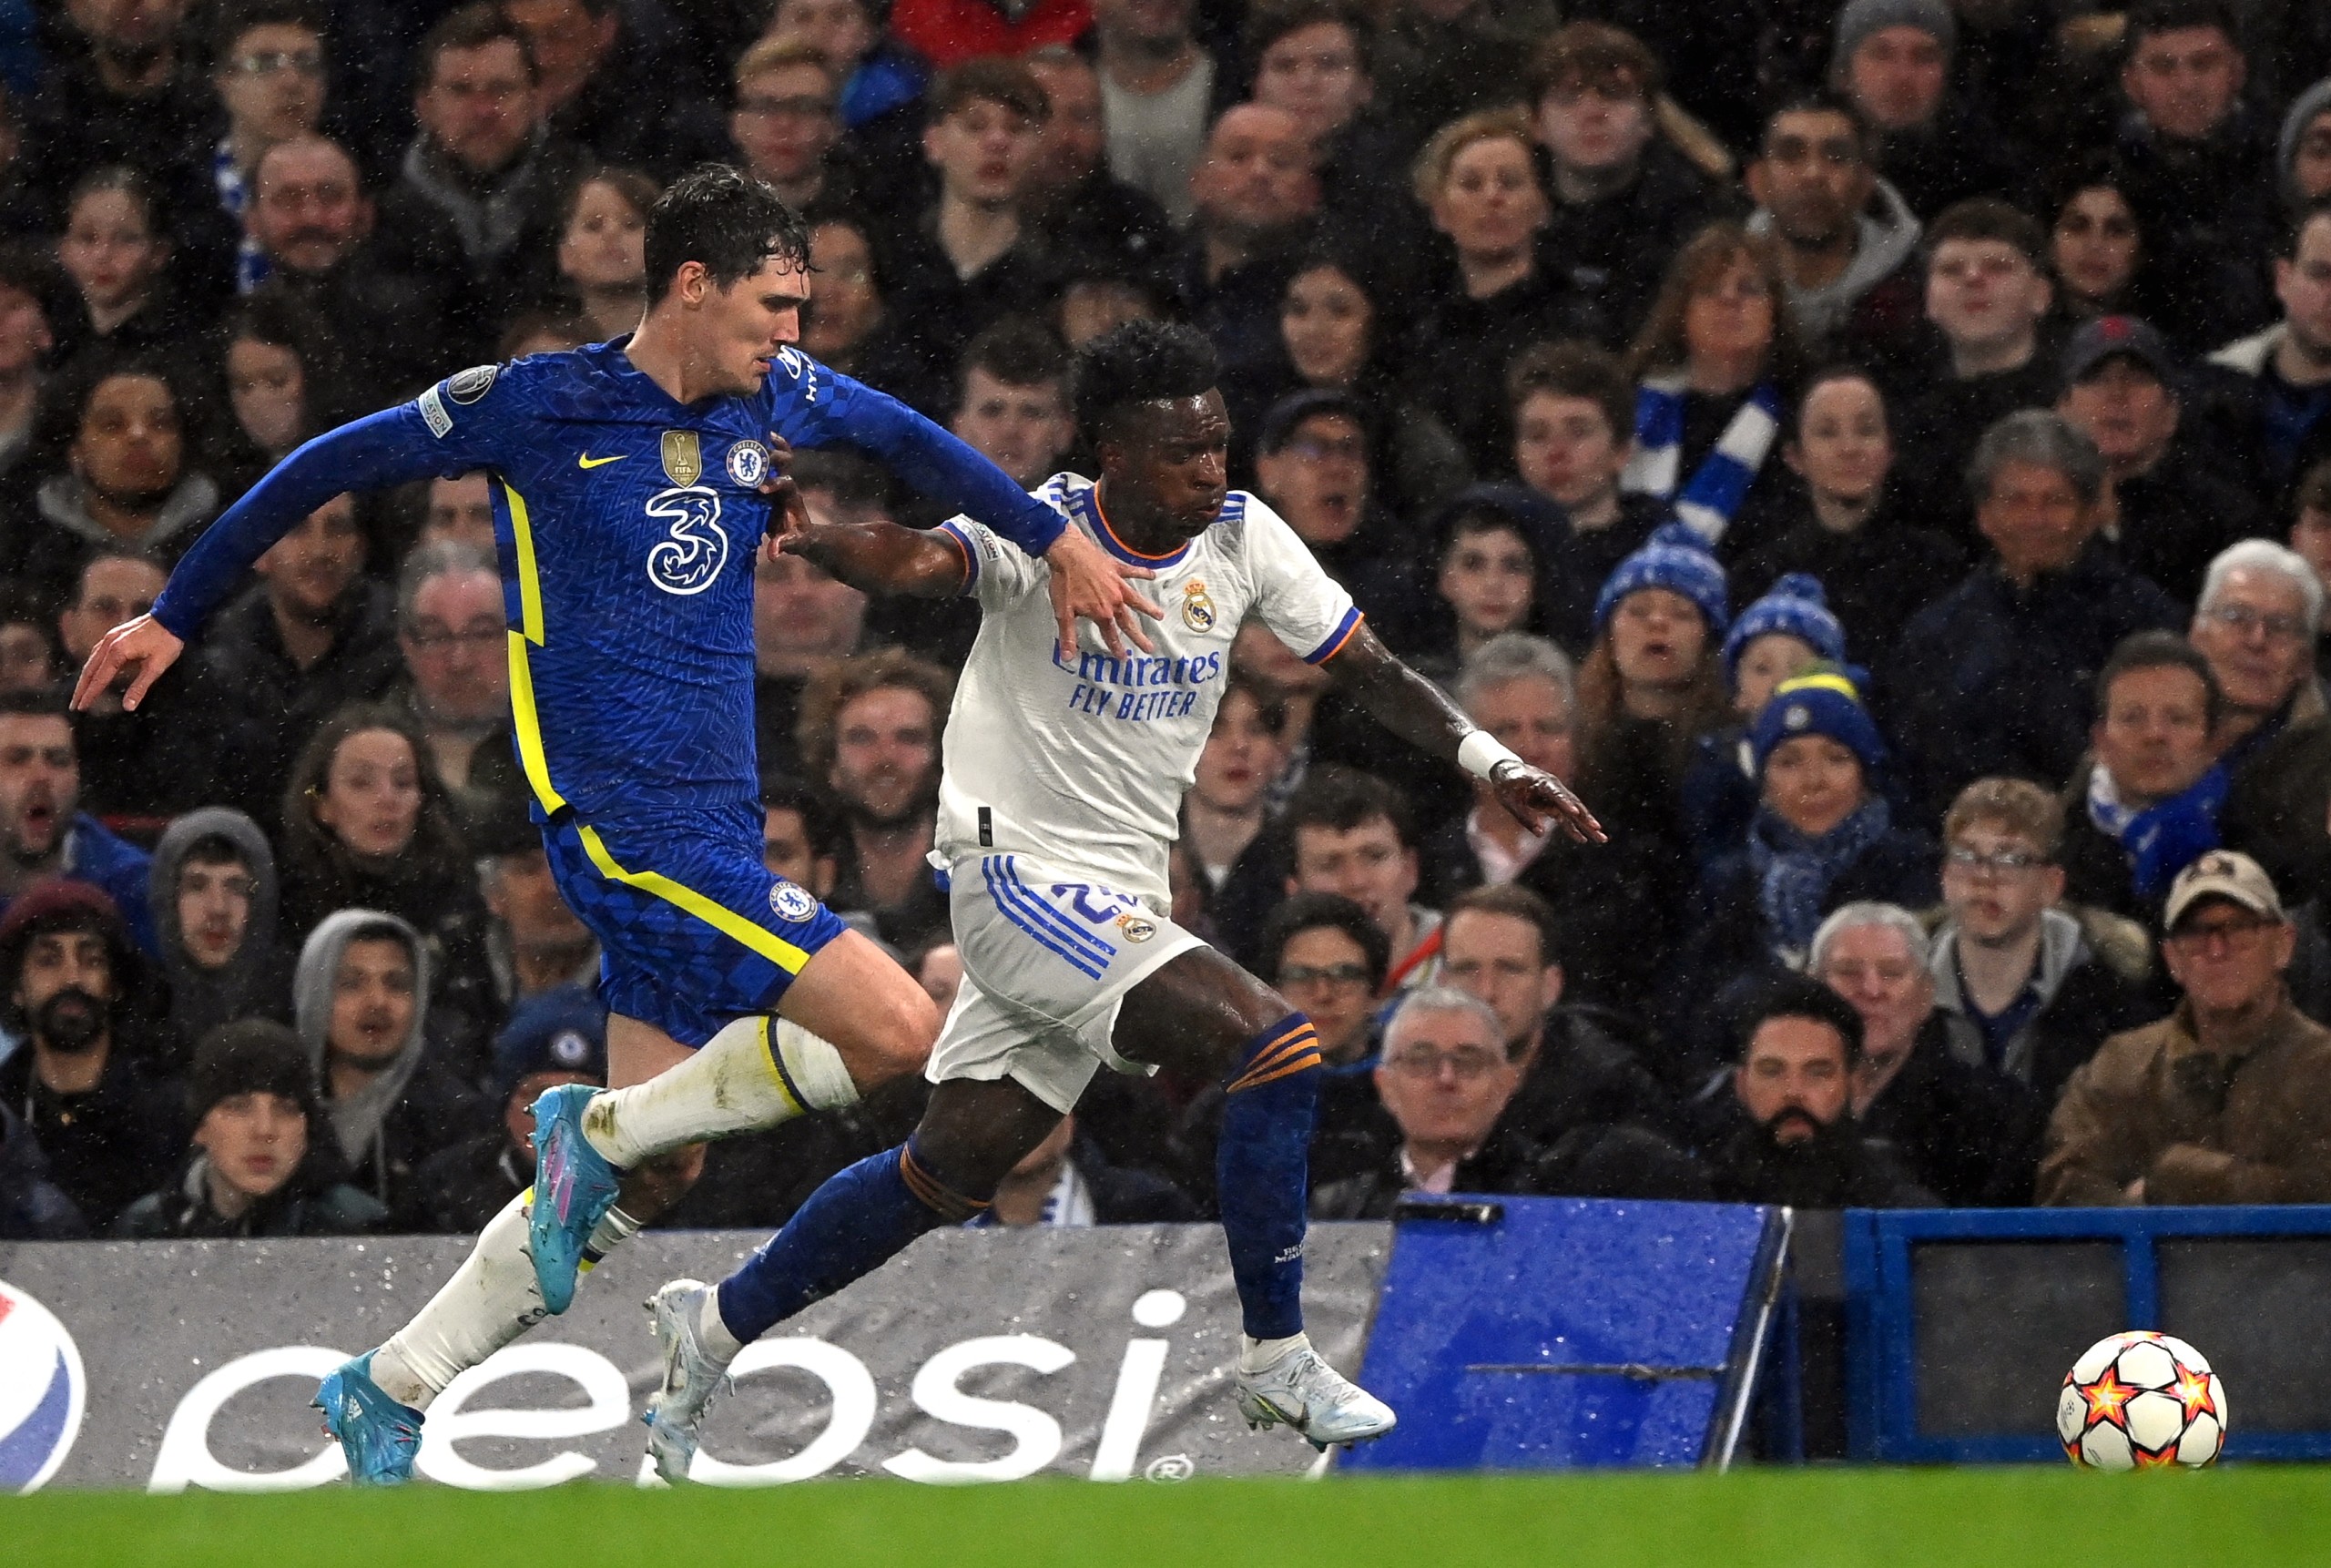 epa09874279 Real Madrid's Vinicius Junior (R) in action against Chelsea's Andreas Christensen (L) during the UEFA Champions League quarter final, first leg soccer match between Chelsea FC and Real Madrid in London, Britain, 06 April 2022.  EPA/NEIL HALL